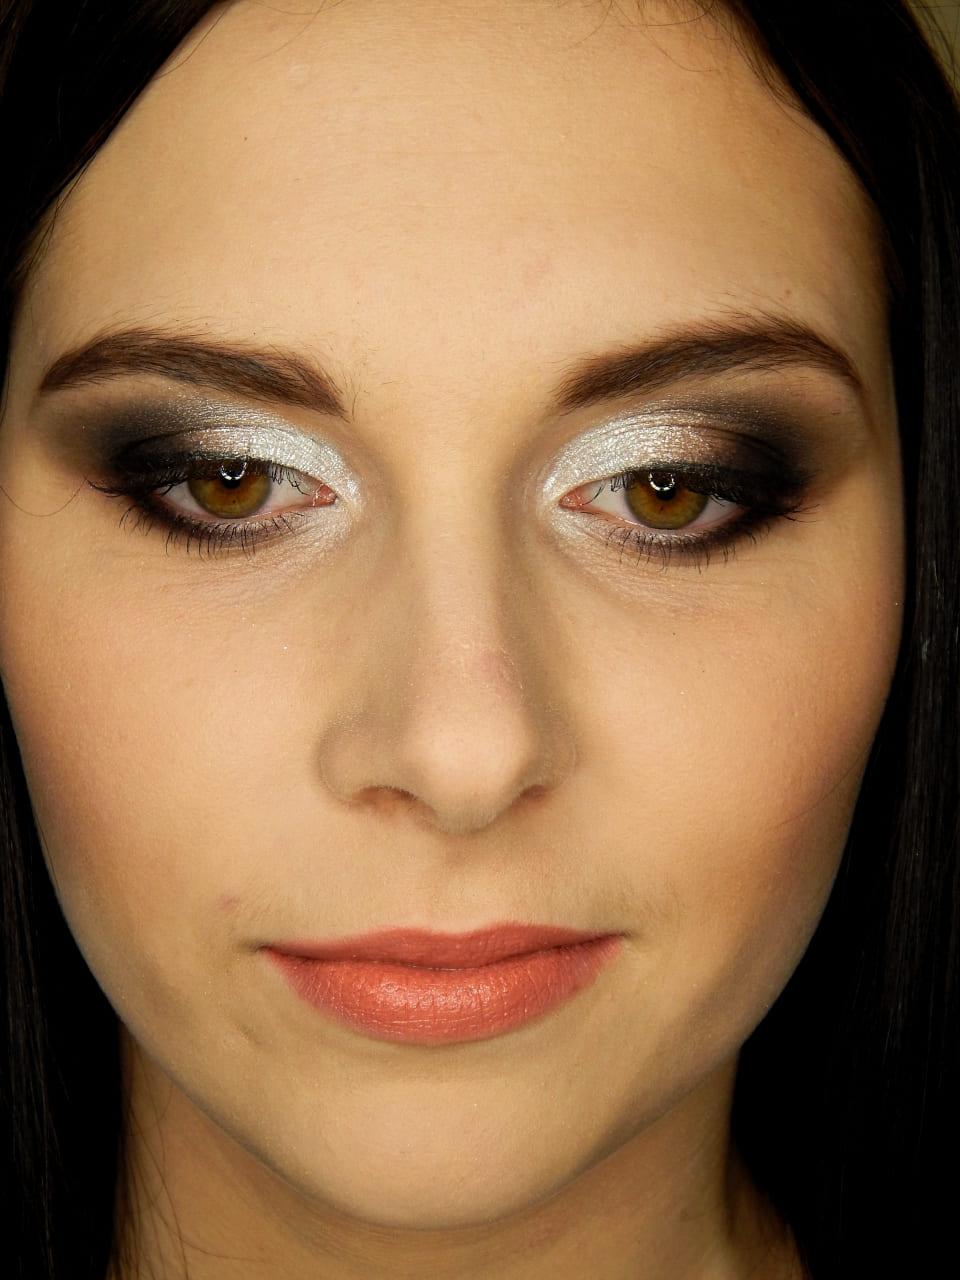 Photo of a model with make-up